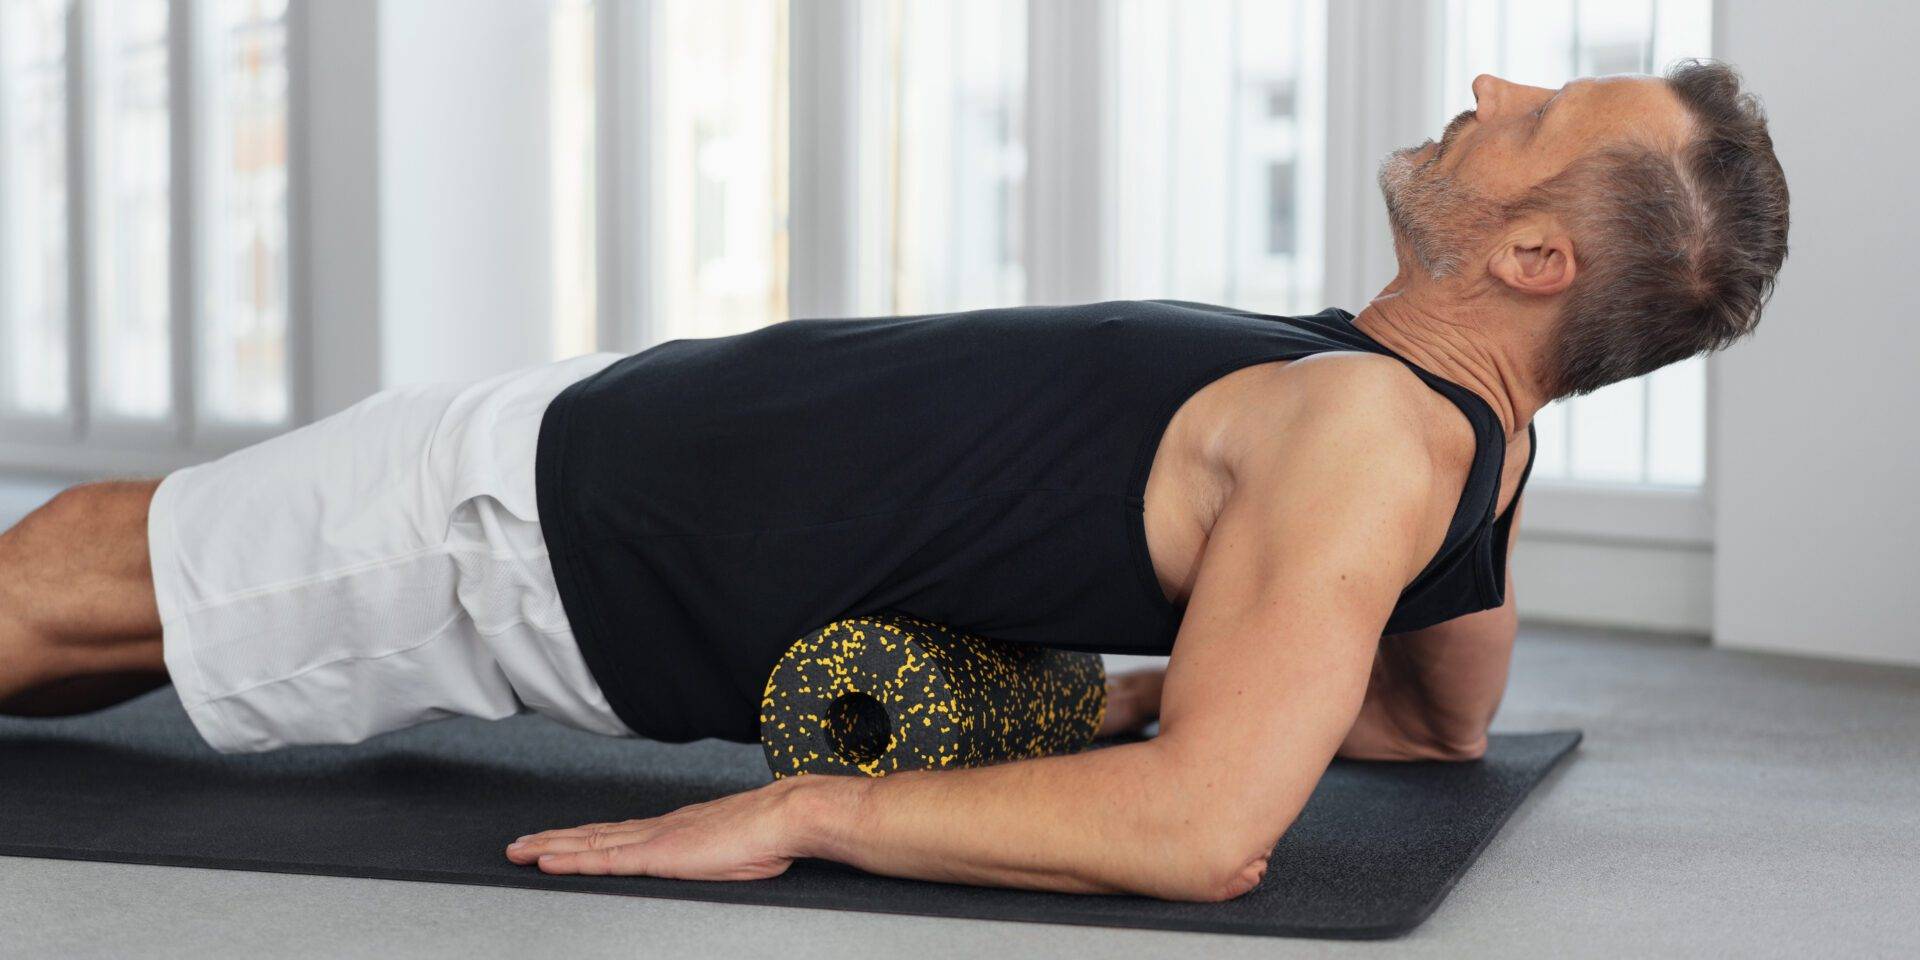 Man using a foam roller to massage his back